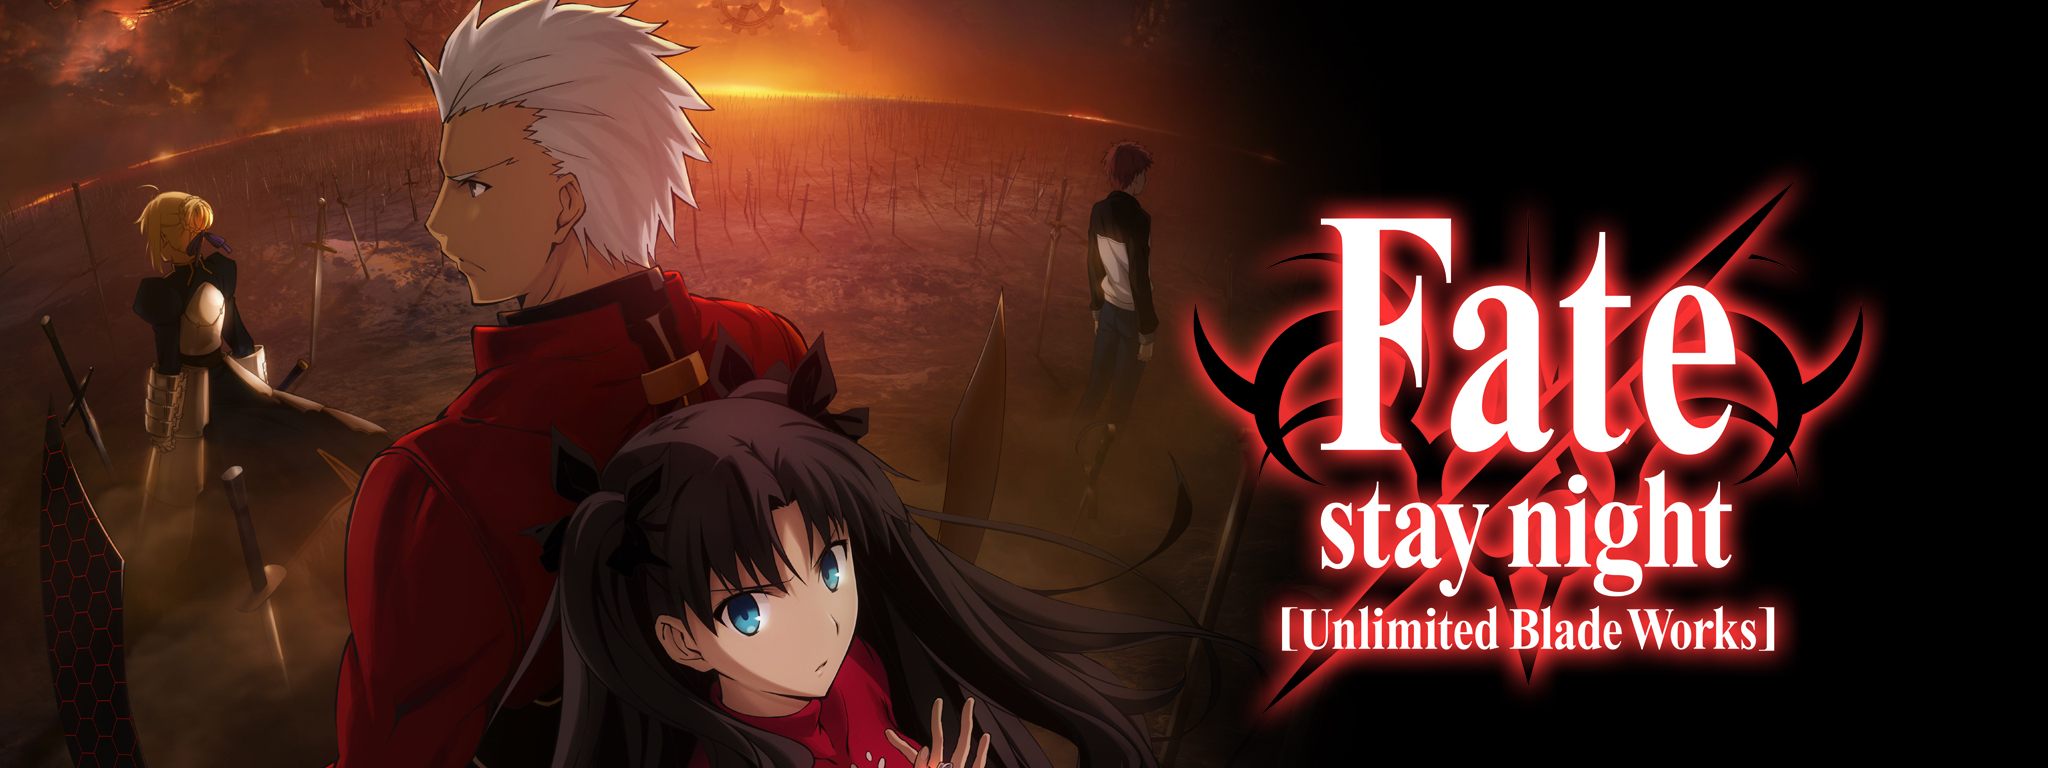 Fate stay night unlimited blade works